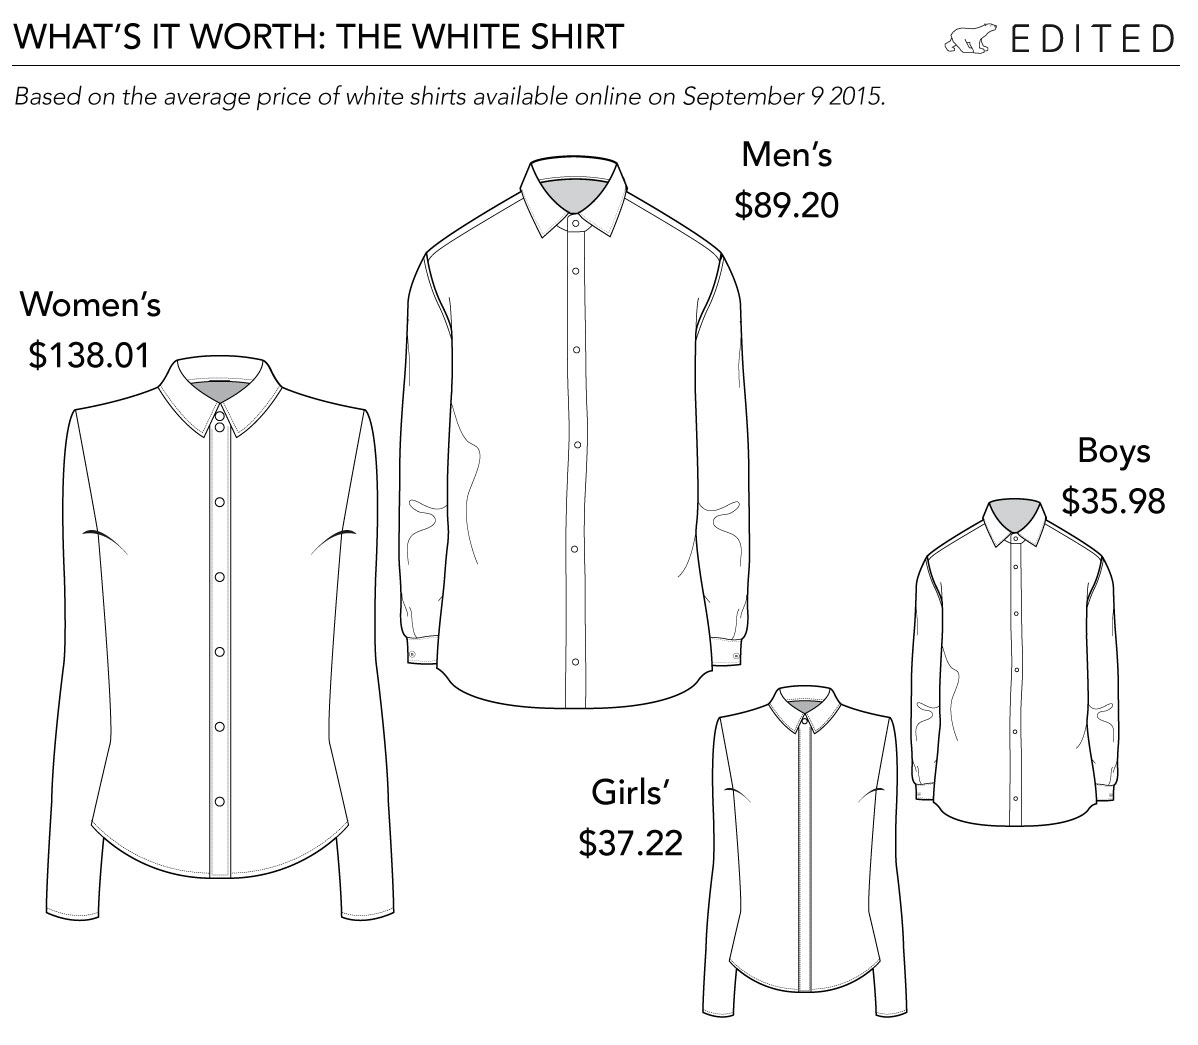 Want a bargain shirt? Hopefully you're a small boy - theirs are the cheapest on average.